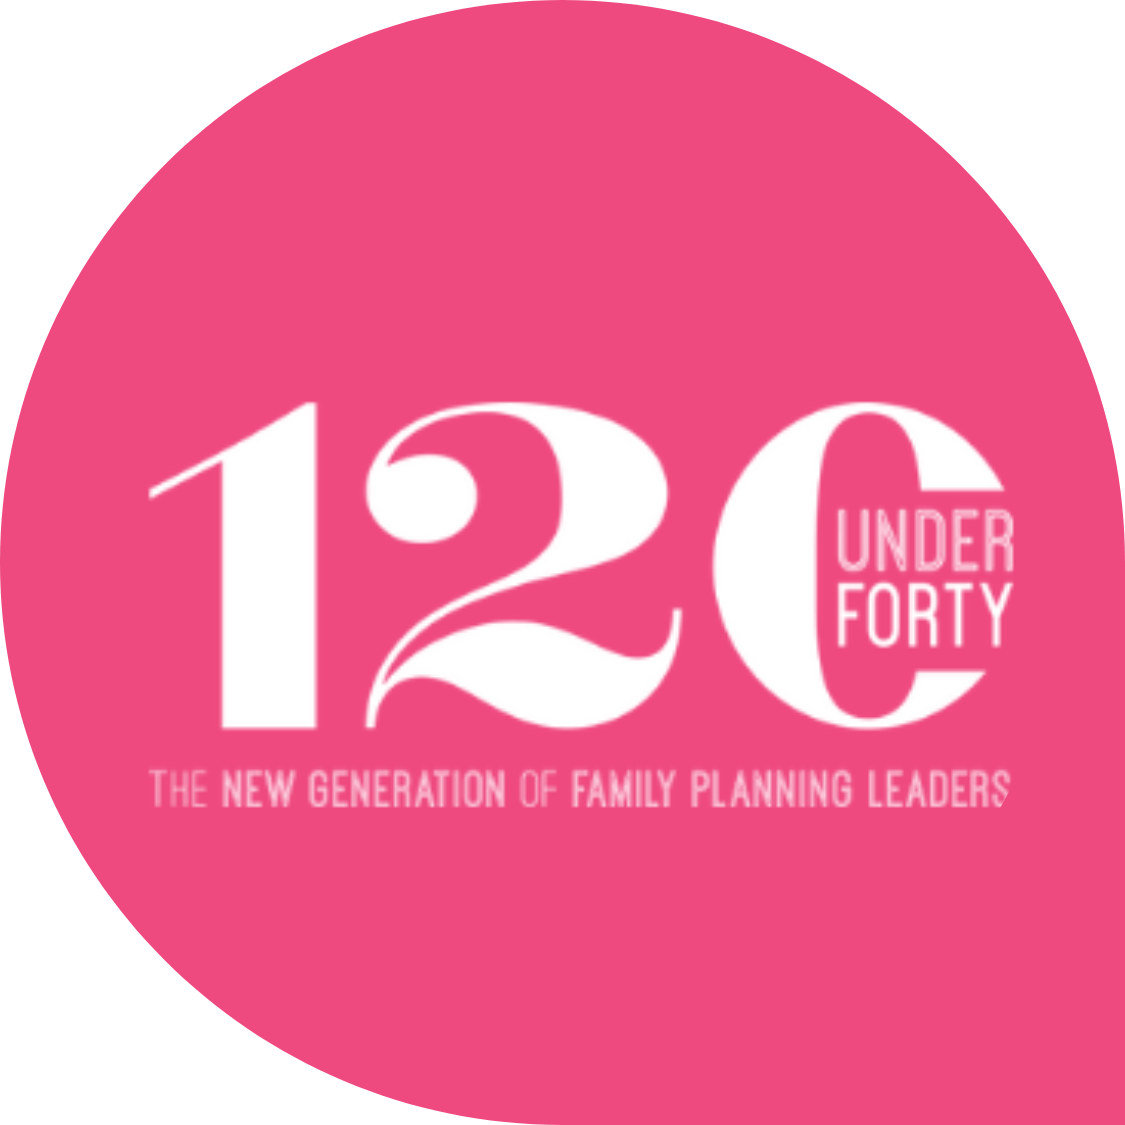 120 Under 40: Next Generation of Family Planning Leaders